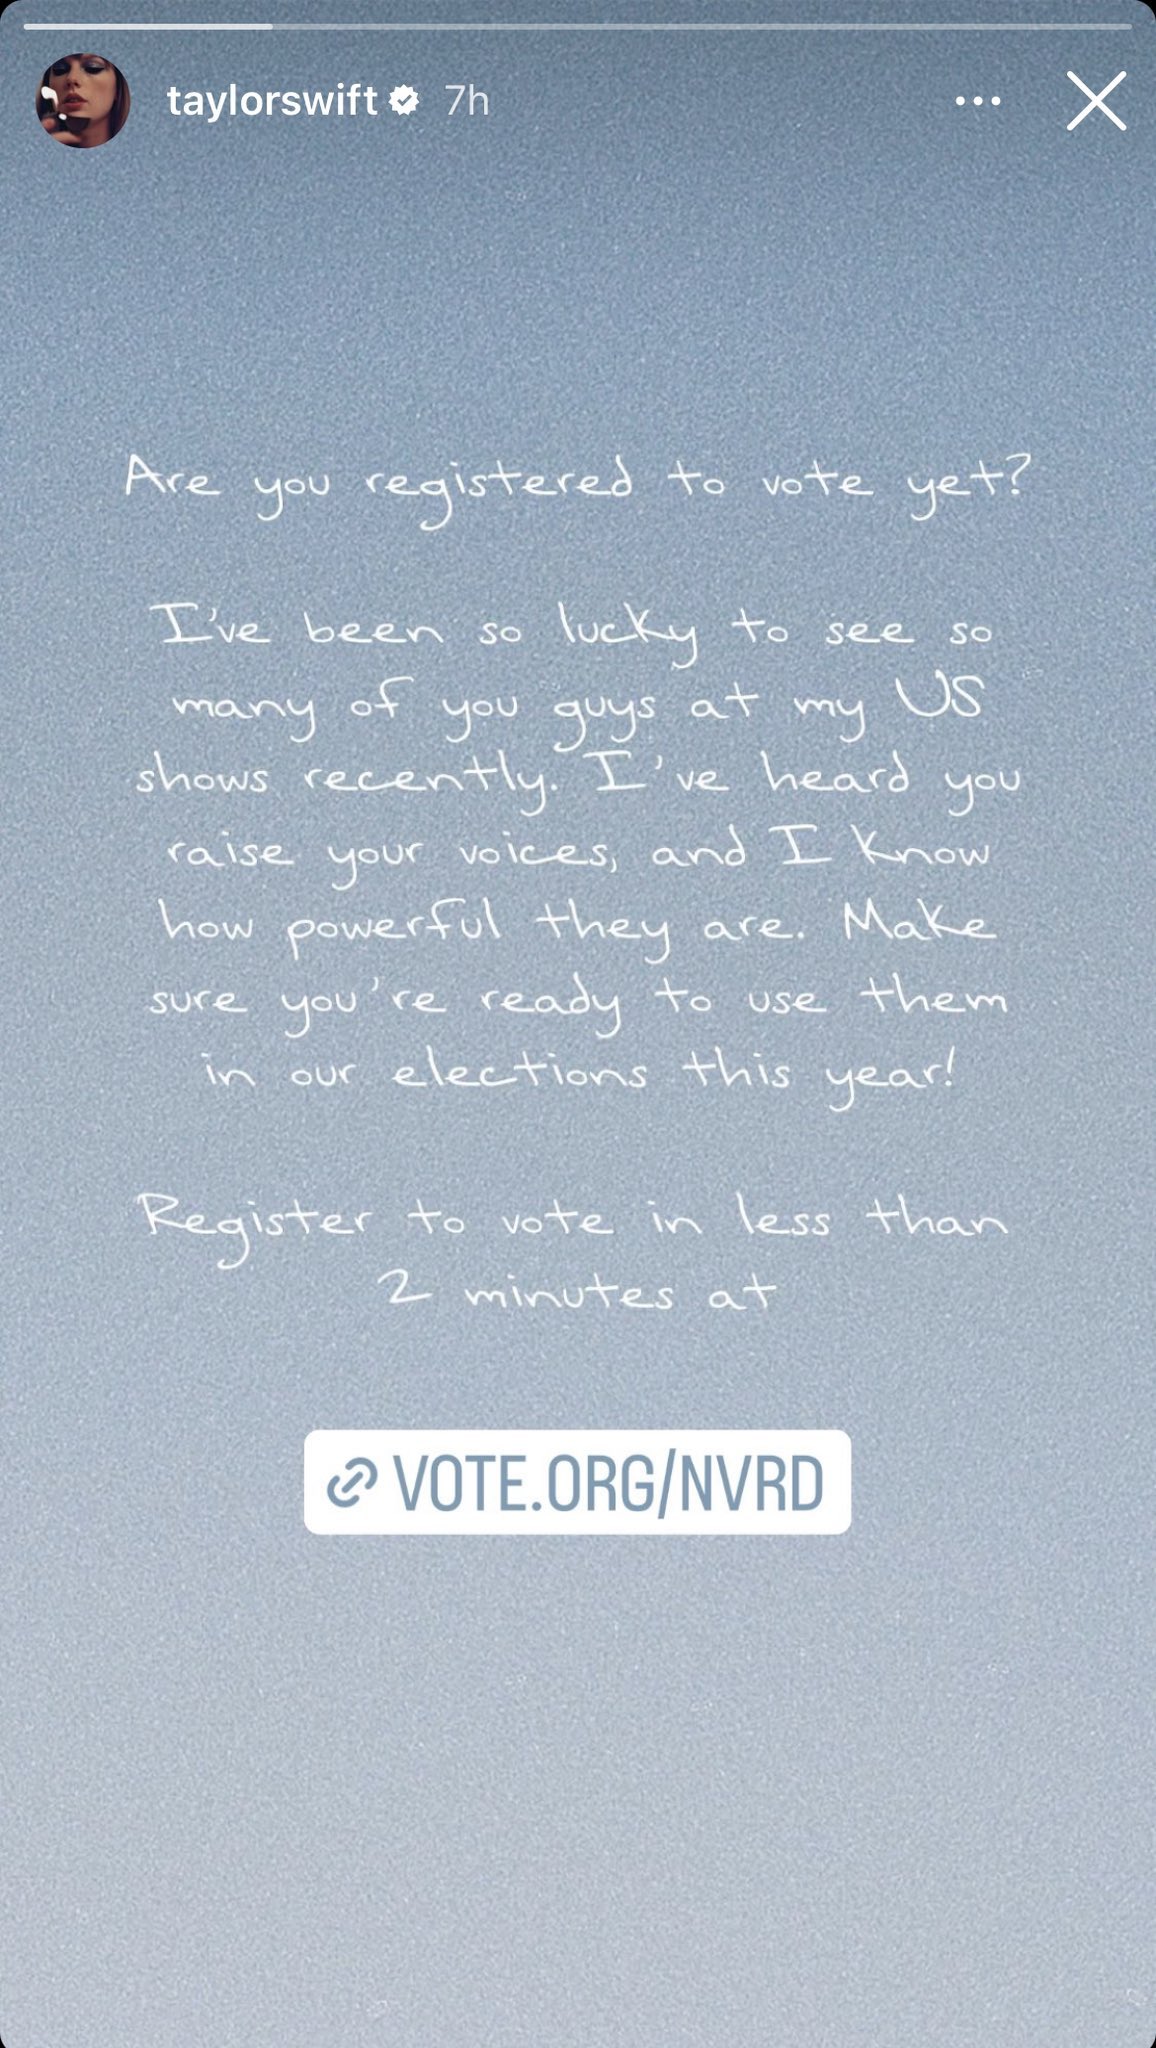 Text posted to Taylor Swift's Instagram story.

@taylorswift:
Are you registered to vote yet/
I've been so lucky to see so many of you guys at my US shows recently. I've heard you raise your voices, and I know how powerful they are. Make sure you're ready to use them in our elections this year!

Register to vote in less than 2 minutes at vote.org/NVRD